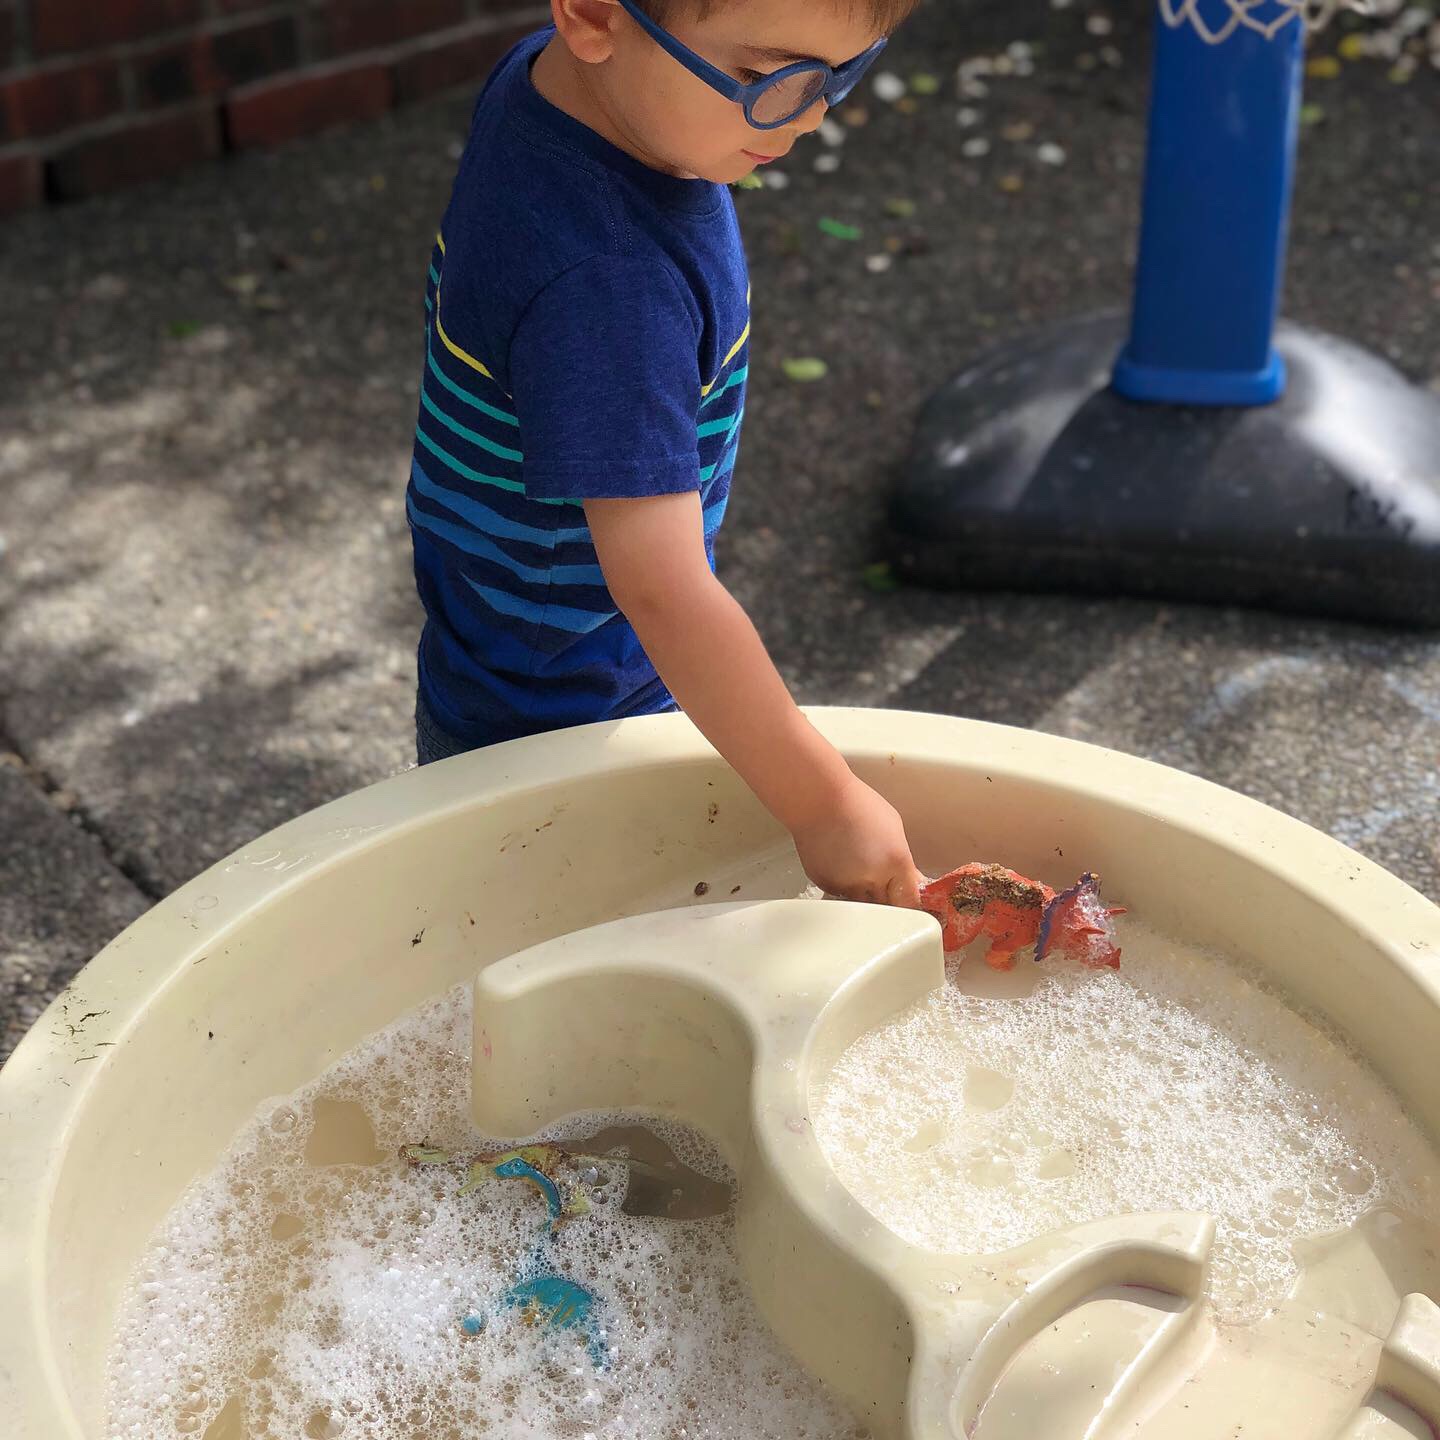 🦕 Dirty Dinosaurs 🦖 Flour, water, and coffee grounds = this fabulous smelling “mud” to have our dinosaurs play in. Then time to clean them off 🧼 Sensory bin using food 💫 I’ve been creating these types of bins for almost 20 years. This is a fun & Simple way you can play today with your child.